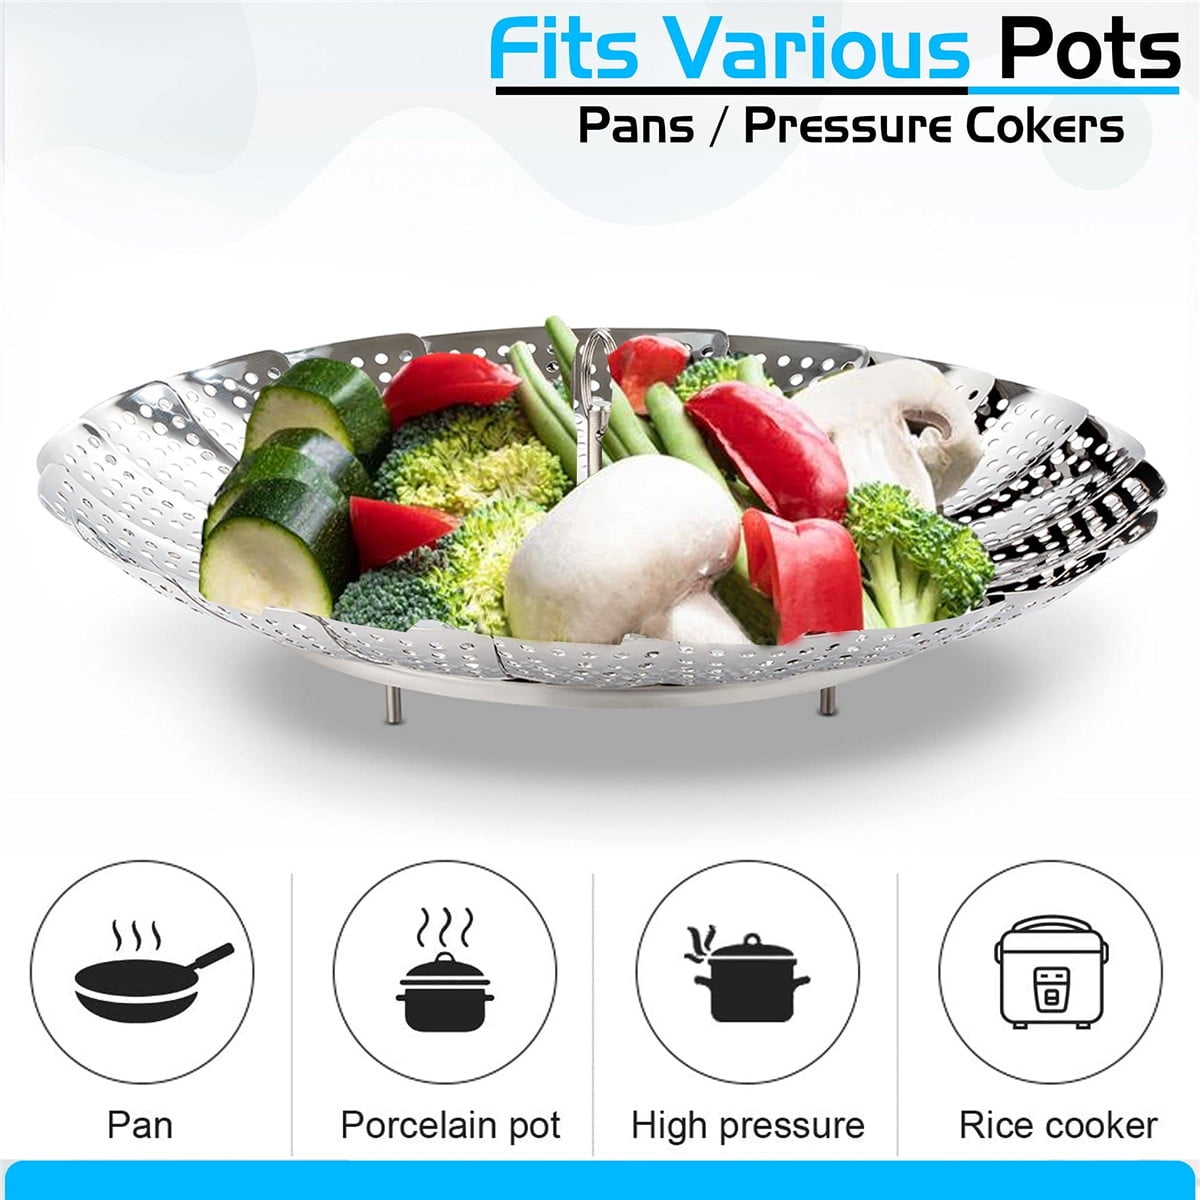 Sayfine Vegetable Steamer Basket, Premium Stainless Steel Veggie Steamer Basket for Cooking - Folding Expandable Steamers to Fits Various Size Pot (